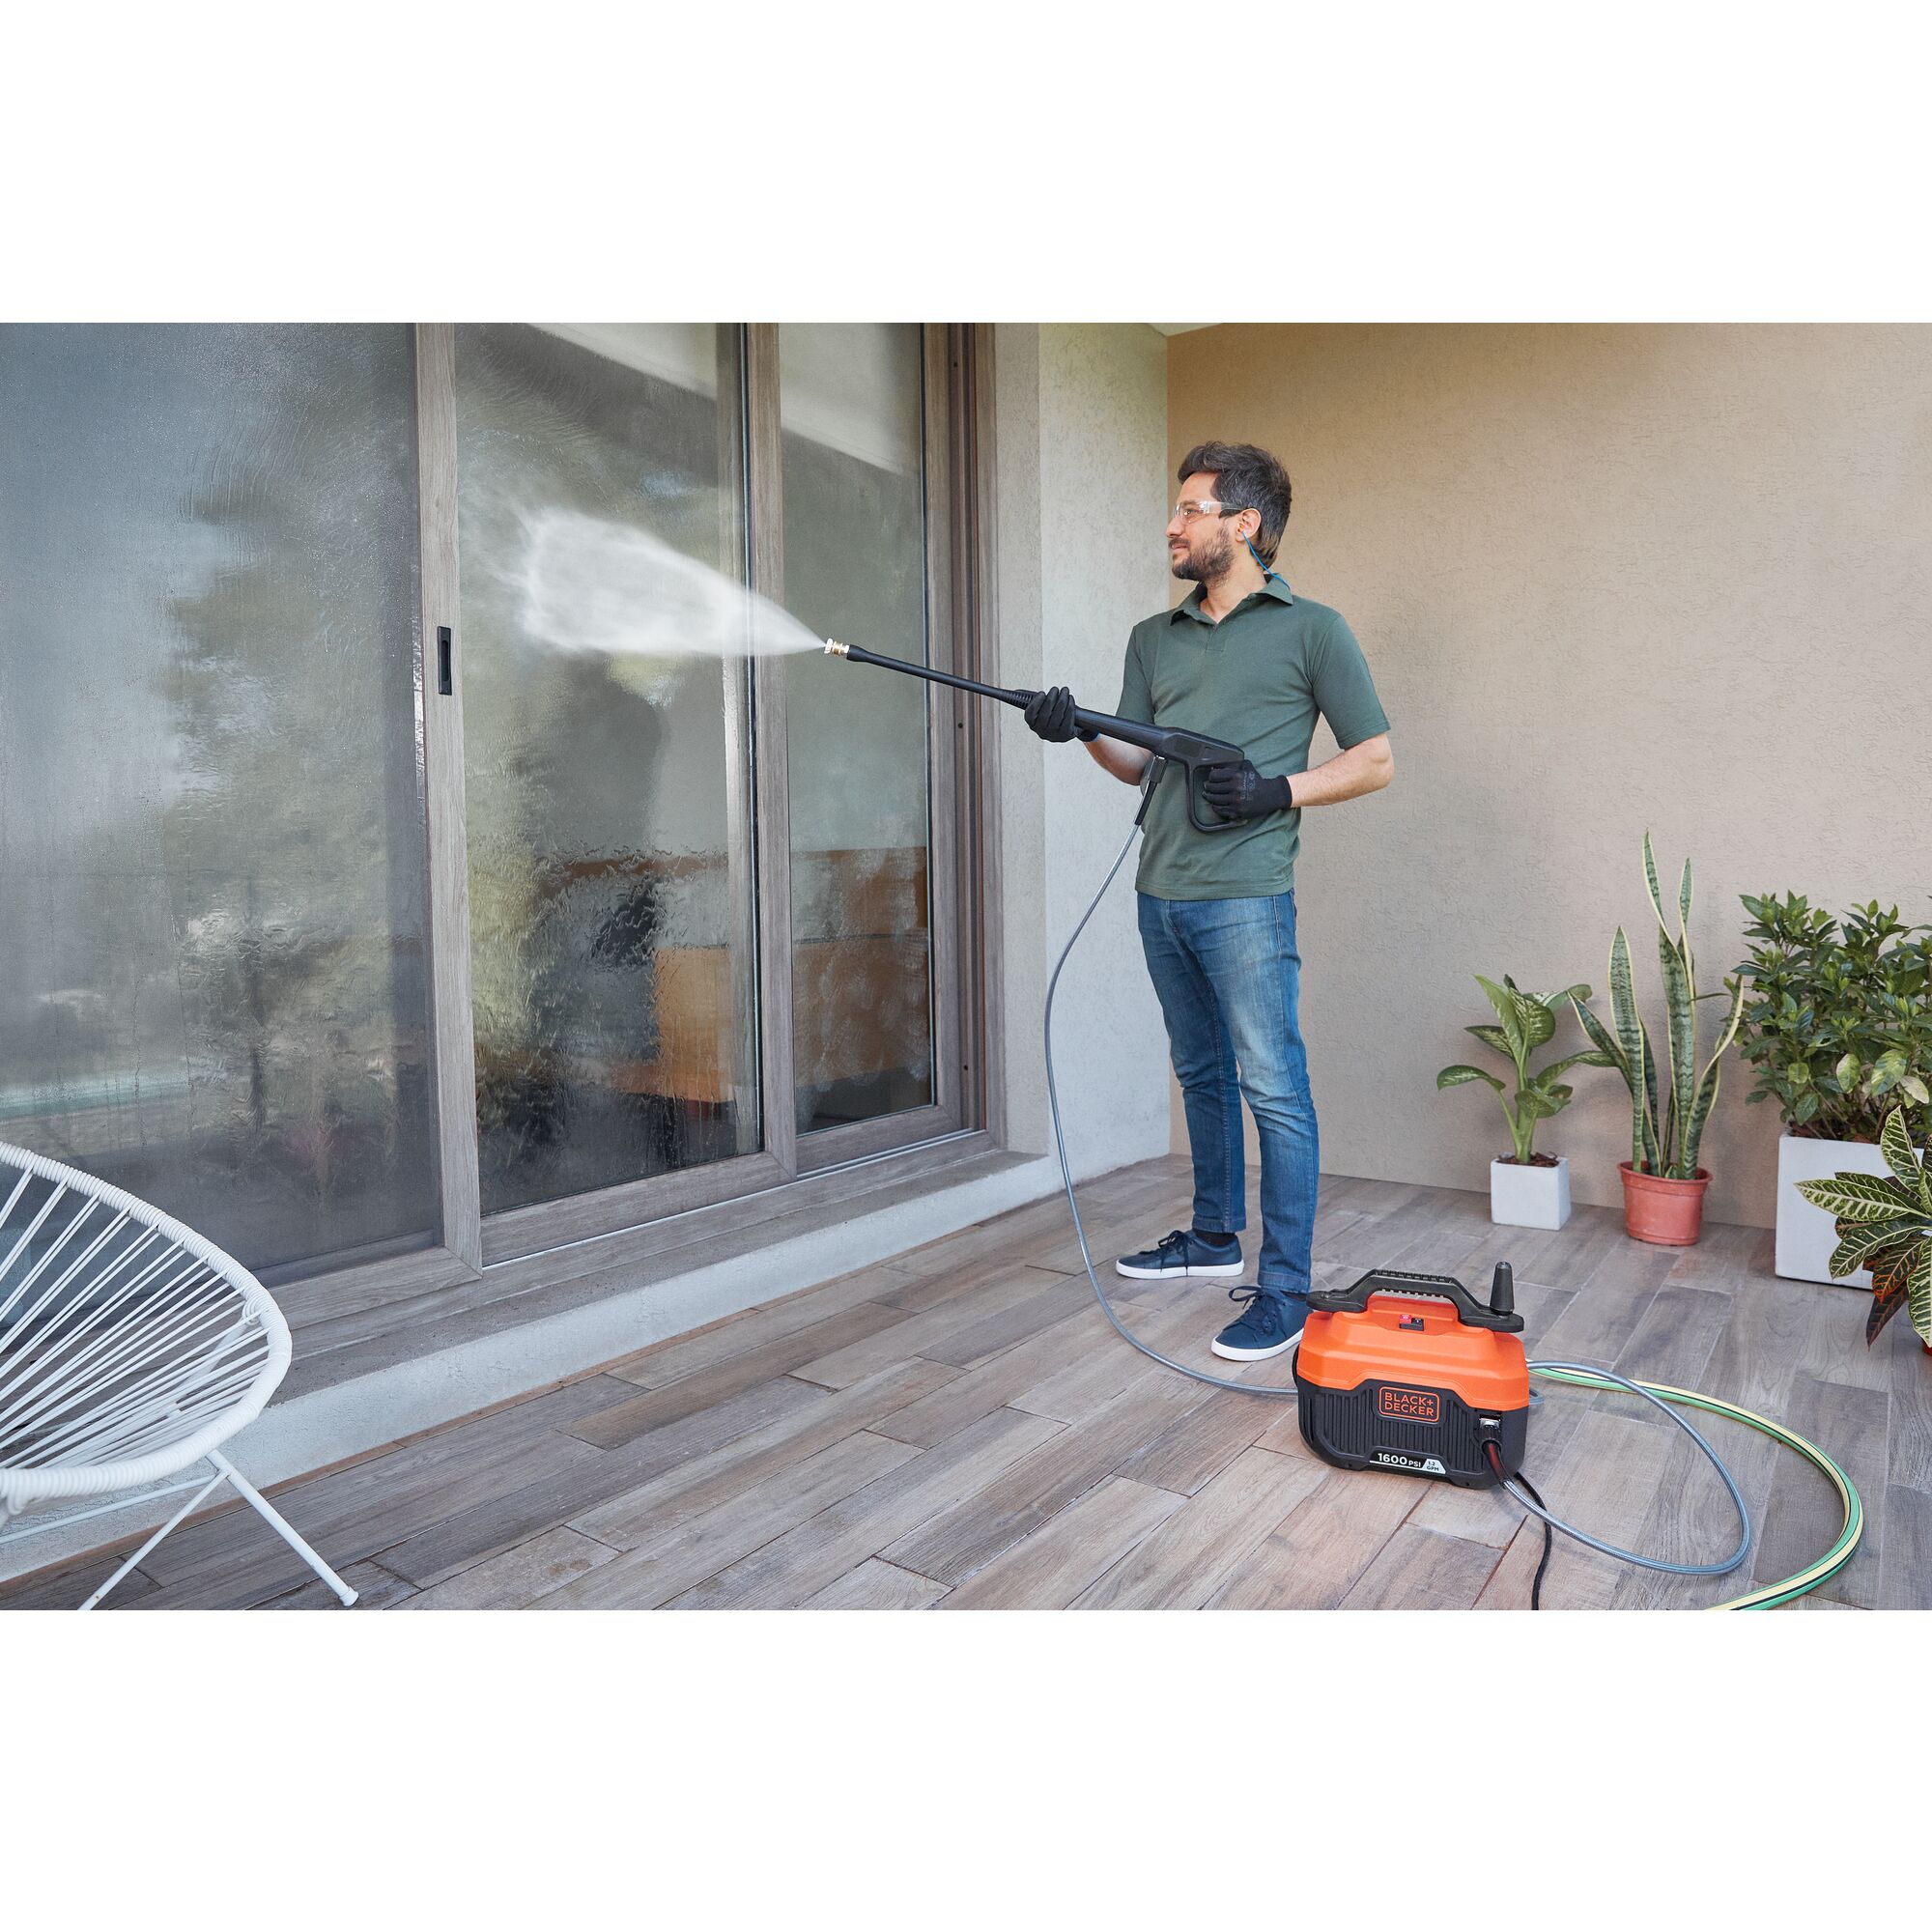 Person using Black and decker 1600-Psi 1.2-Gpm Pressure Washer to clean glass doors